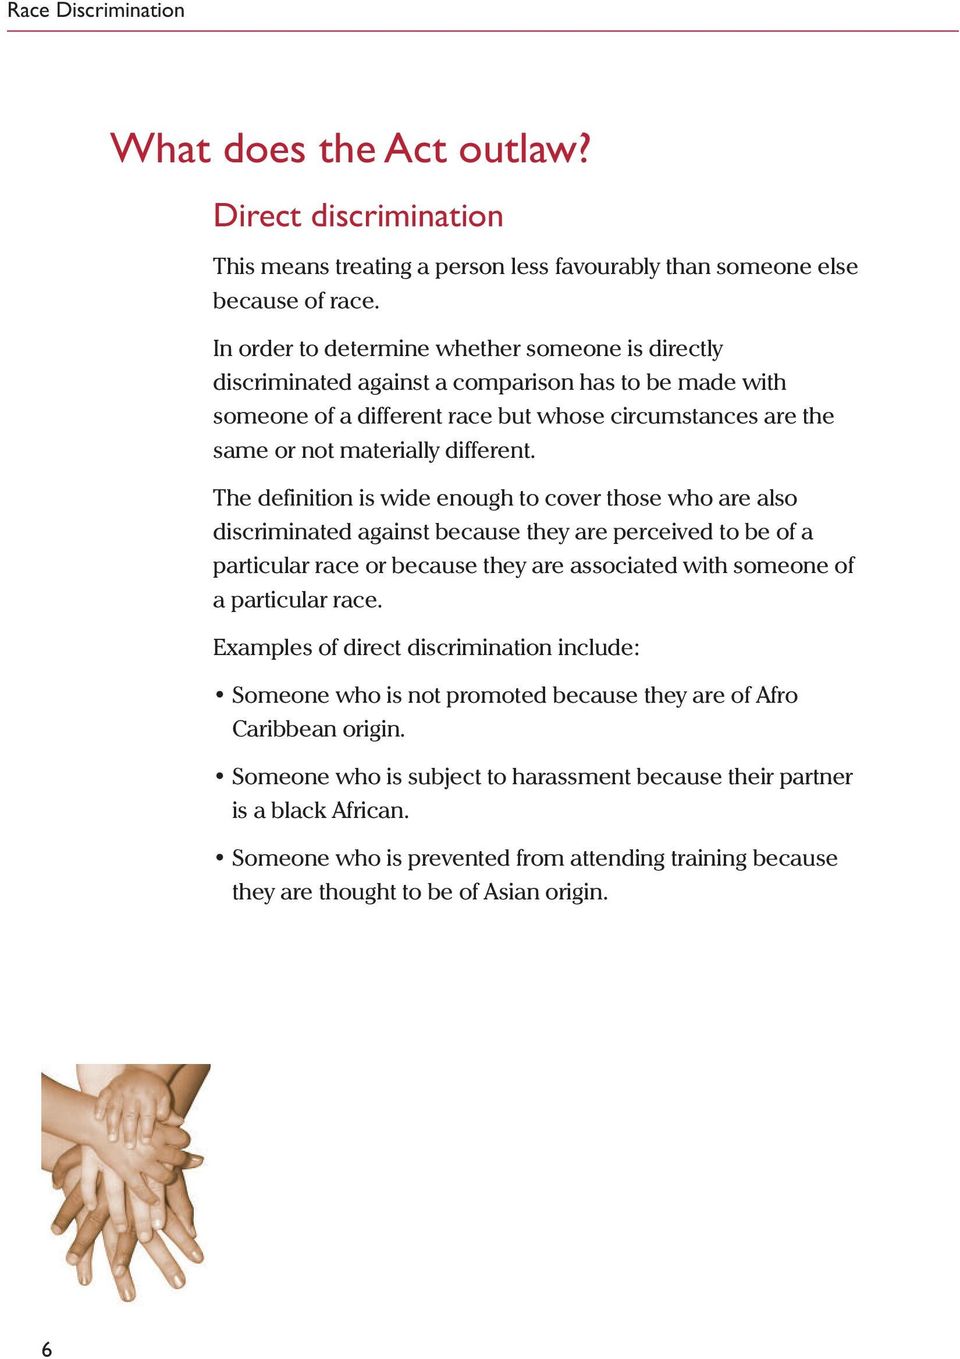 The definition is wide enough to cover those who are also discriminated against because they are perceived to be of a particular race or because they are associated with someone of a particular race.